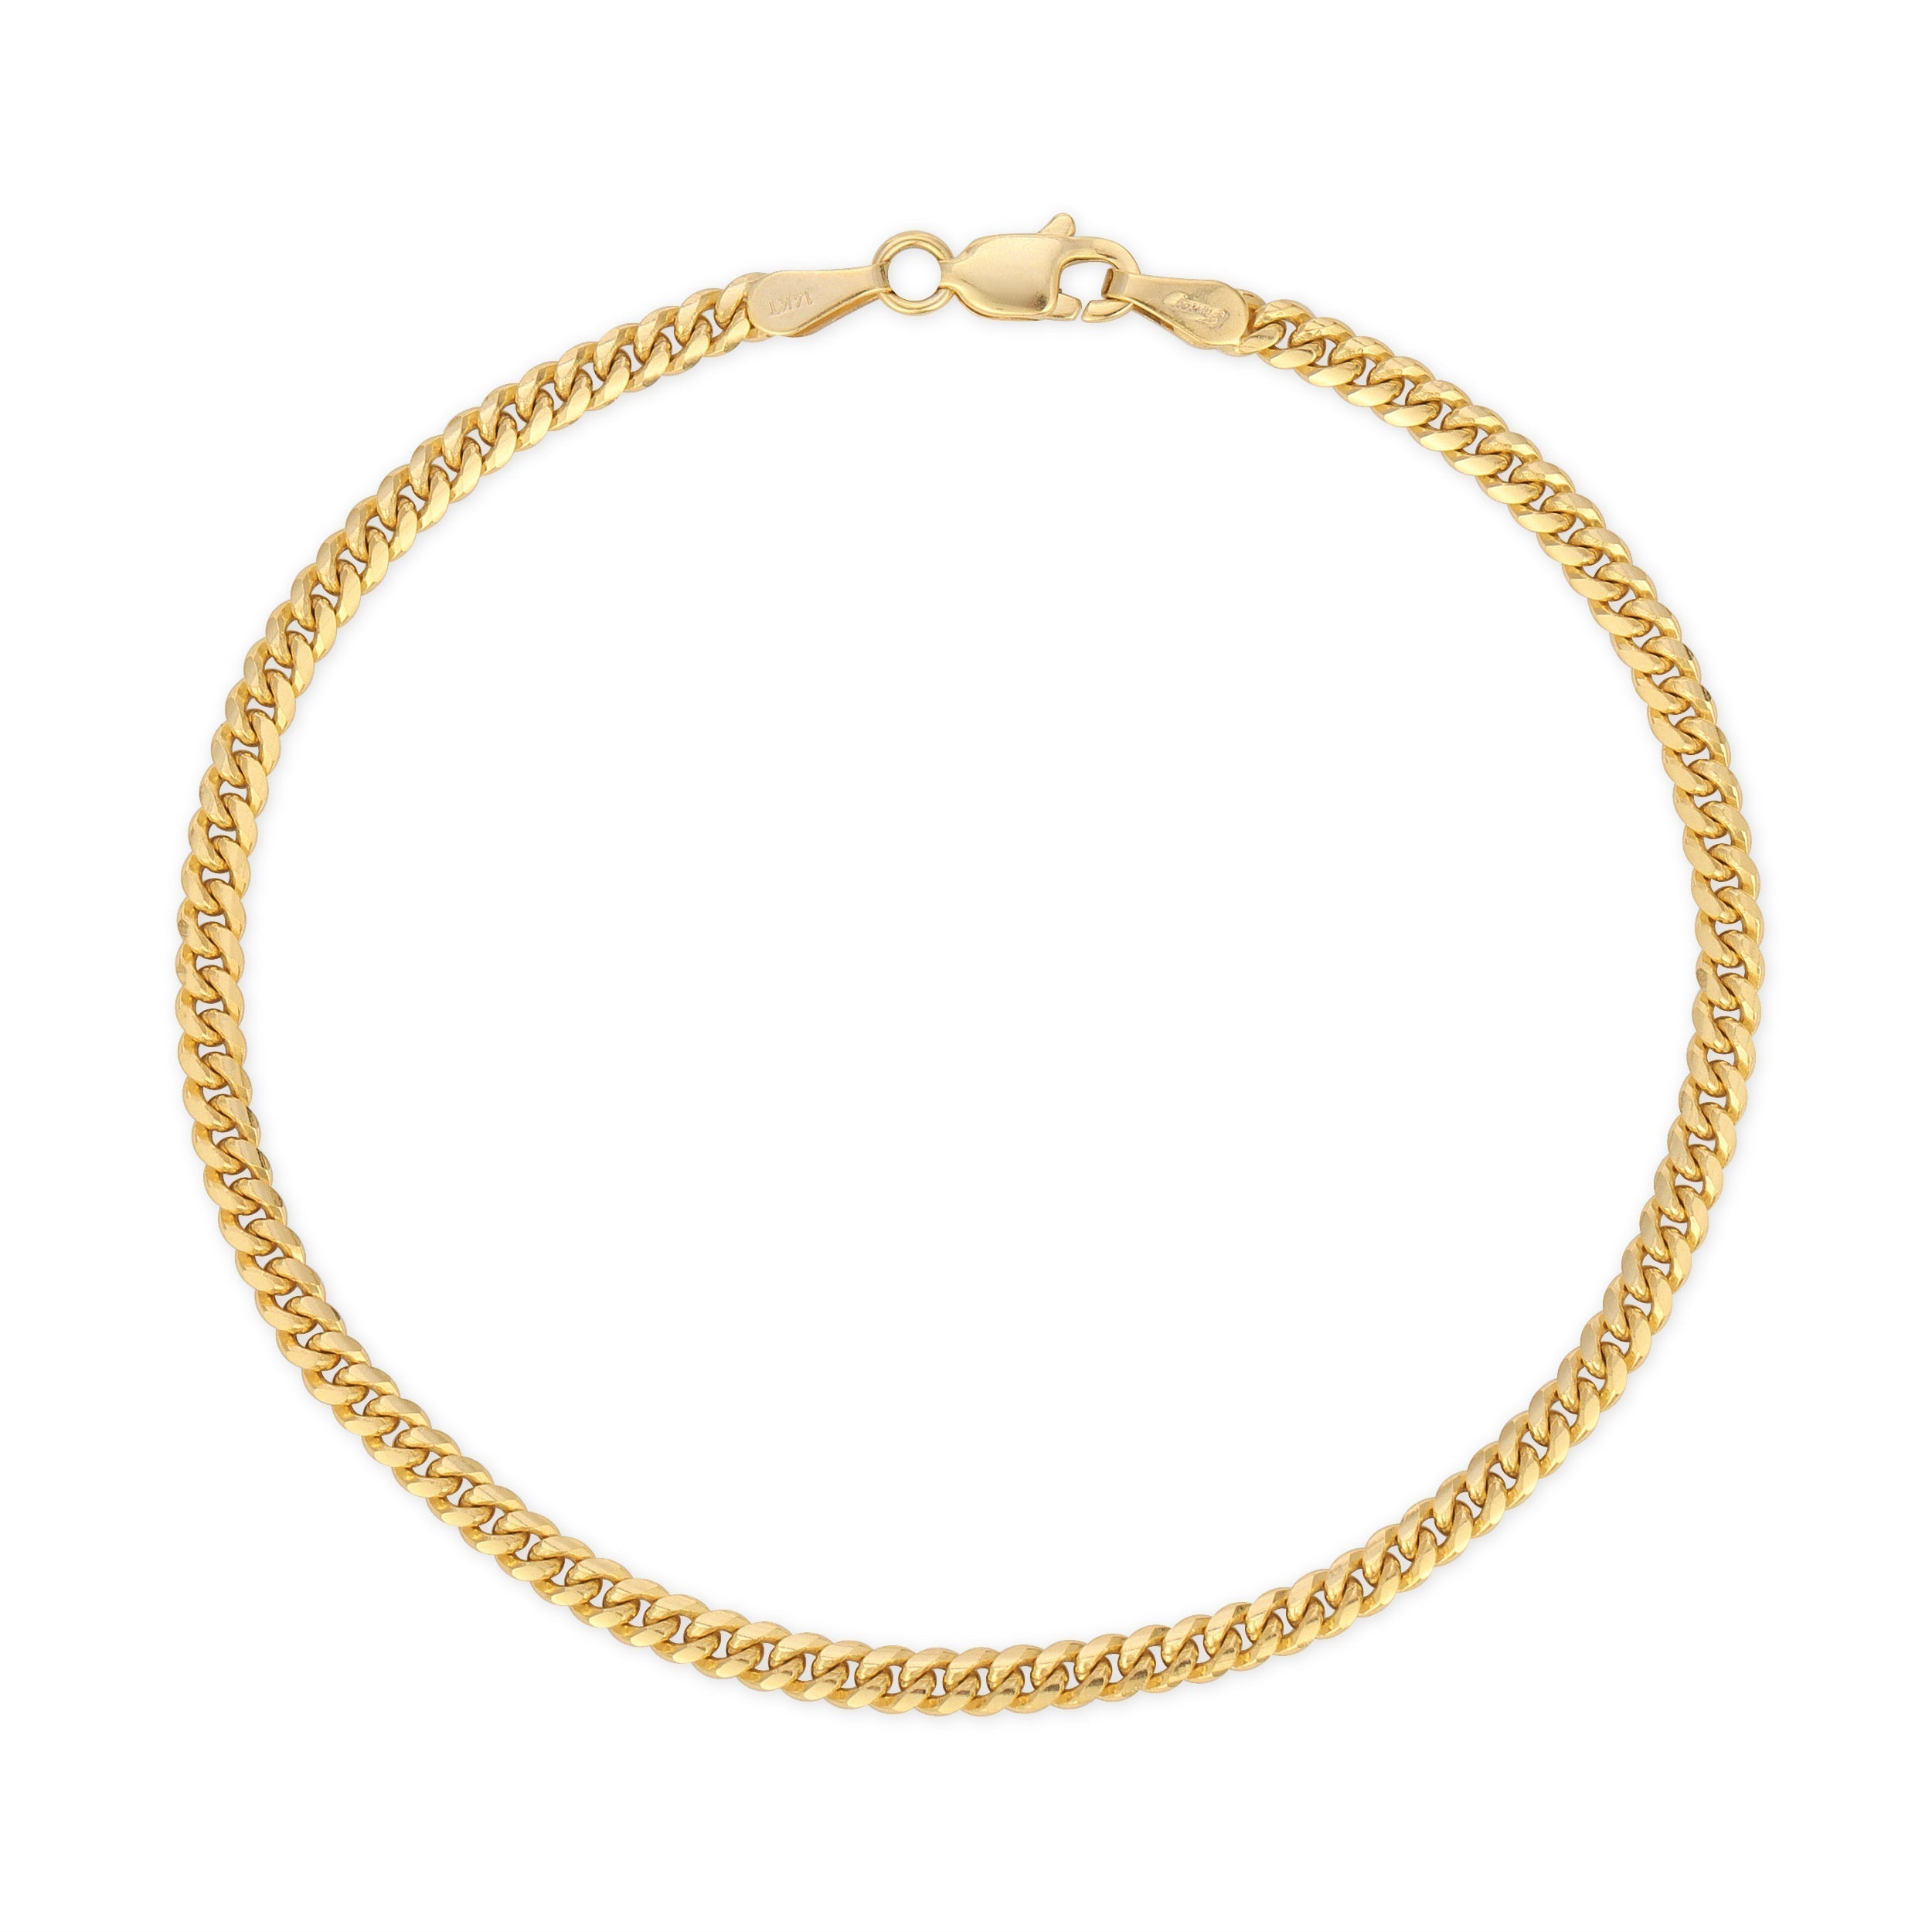 Buy Gold Mens Bracelet Chain 7mm Curb Link Chain Bracelet Mens Woman Chain  Online in India - Etsy